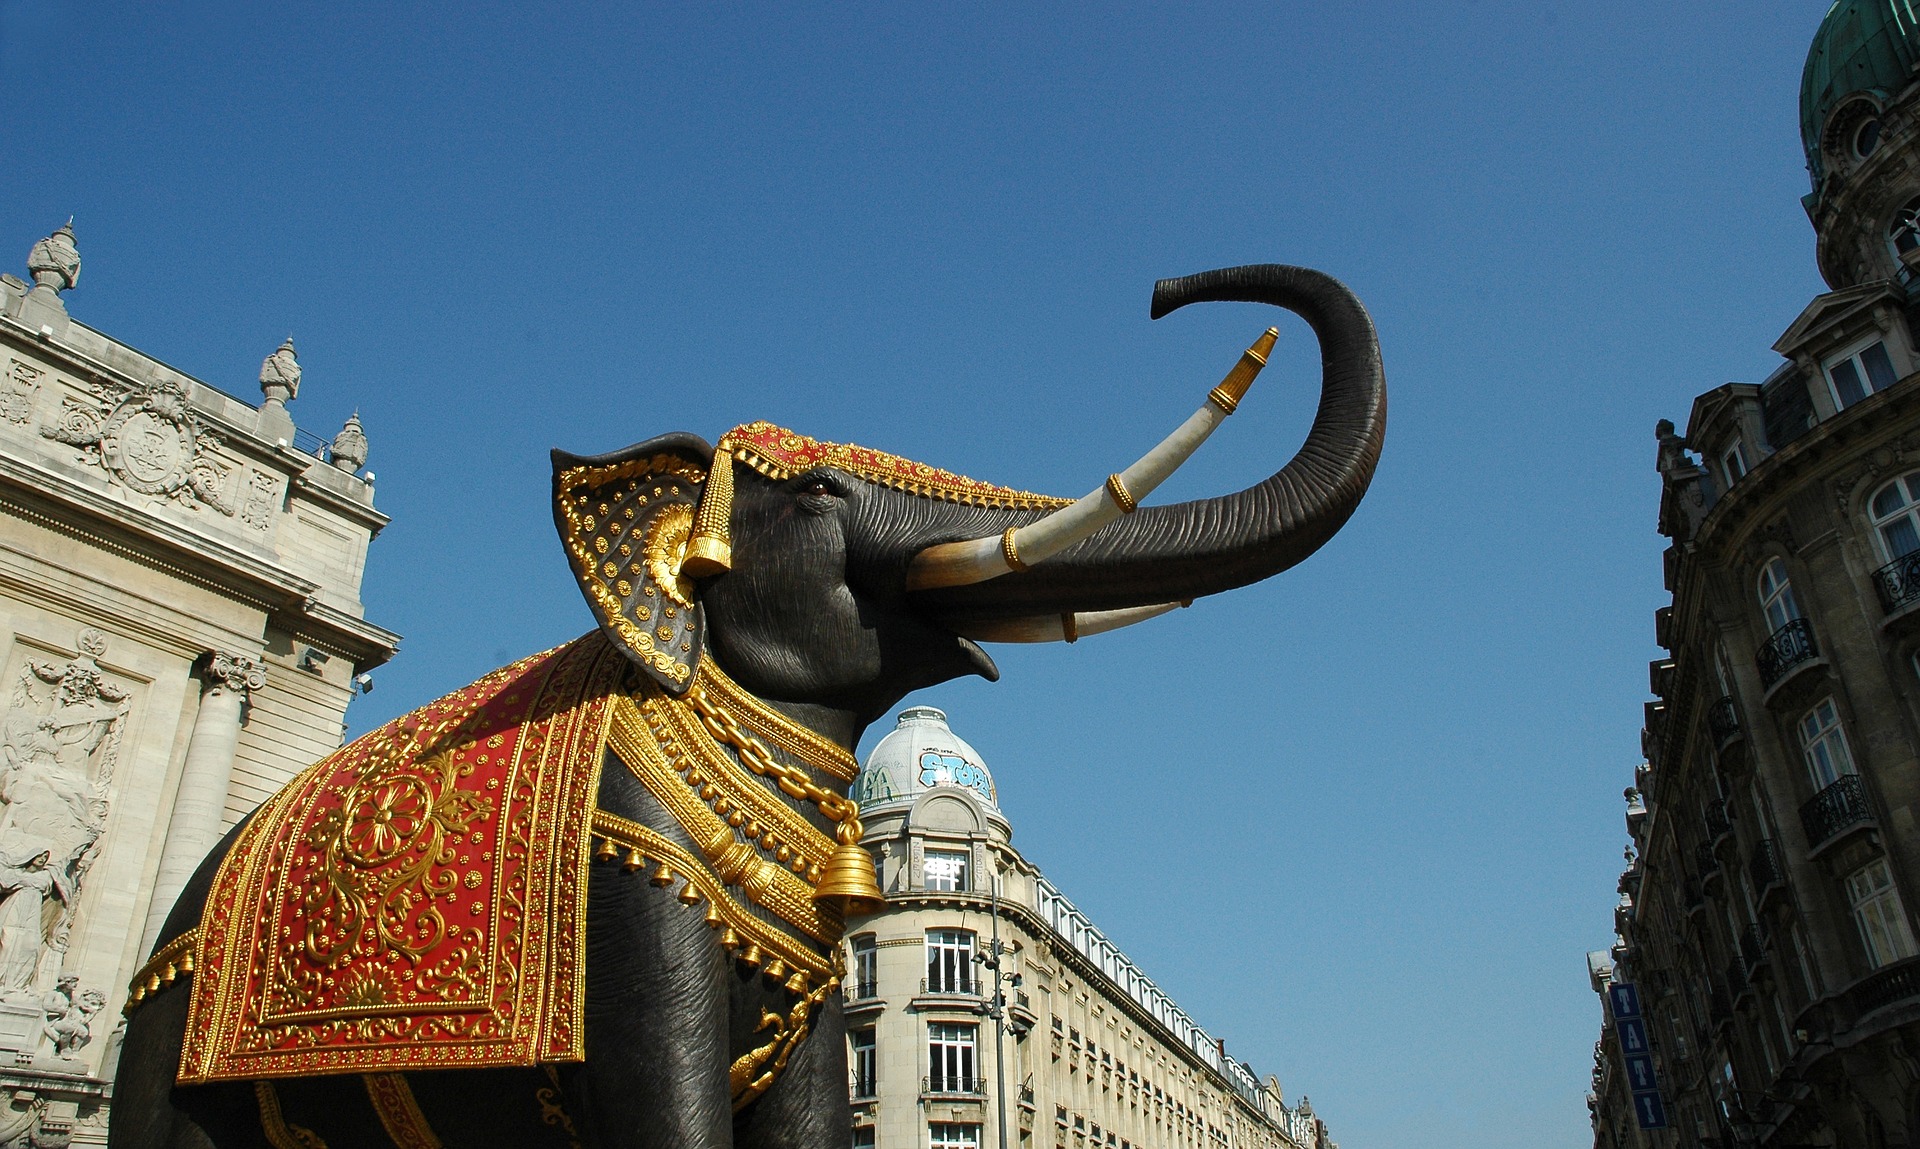 Elephant statue: Elephants in Indian Culture